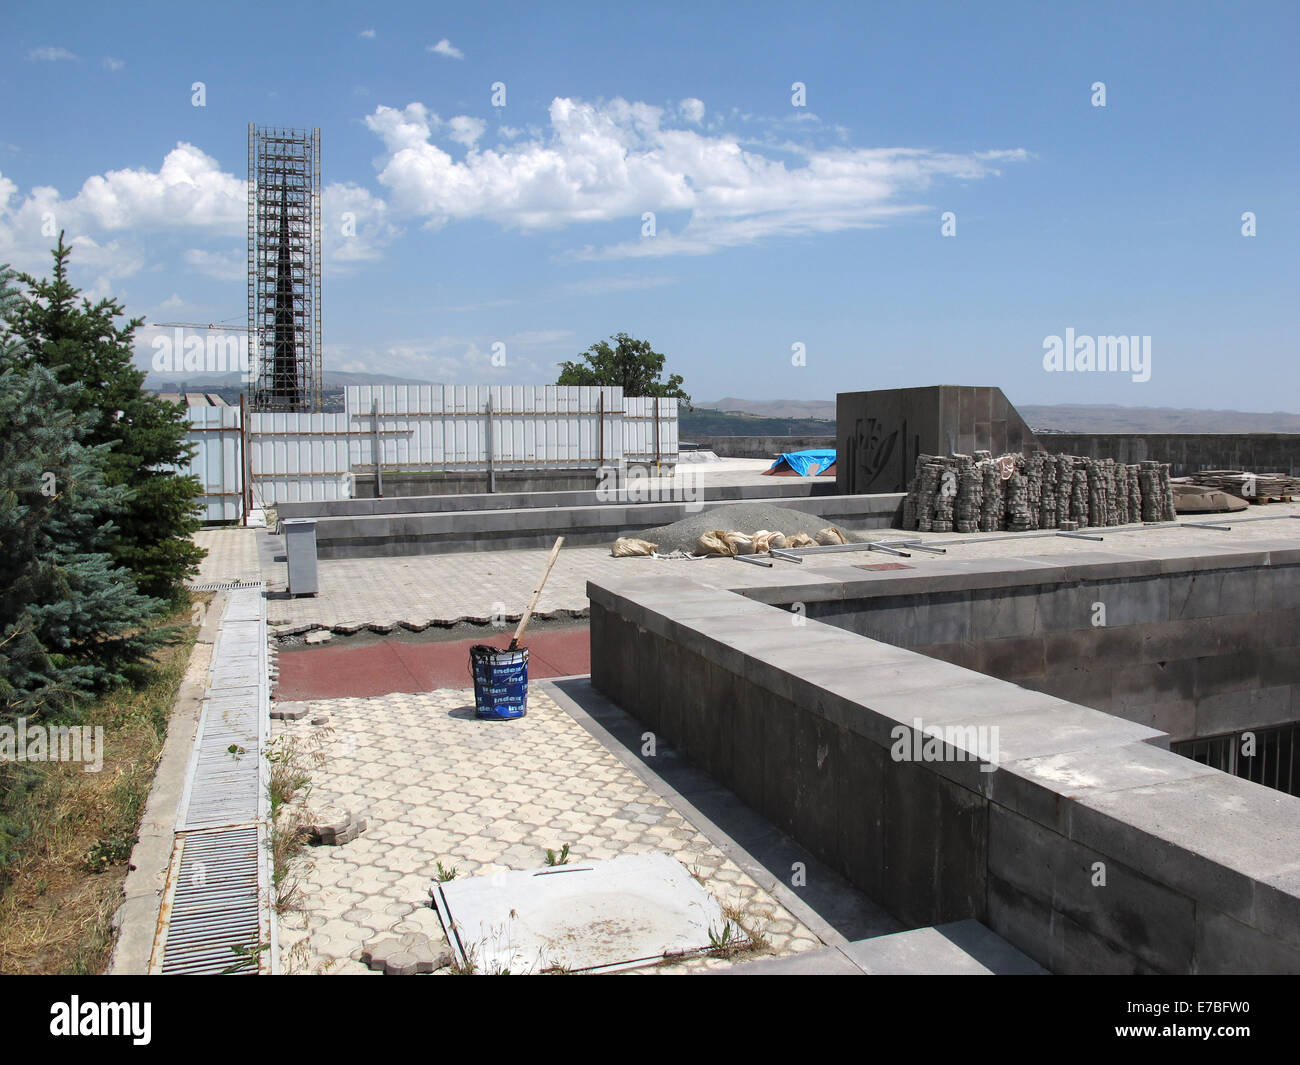 The Armenian Genocide memorial complex on the hill of Tsitsernakaberd in the Armenian capital Yerevan on 28 June 2014. Renovation works are currently underway to prepare the memorial for the centenary of the genocide in 2015. Armenian Genocide Remembrance Day is observed on April 24. Photo: Jens Kalaene -NO WIRE SERVICE- Stock Photo